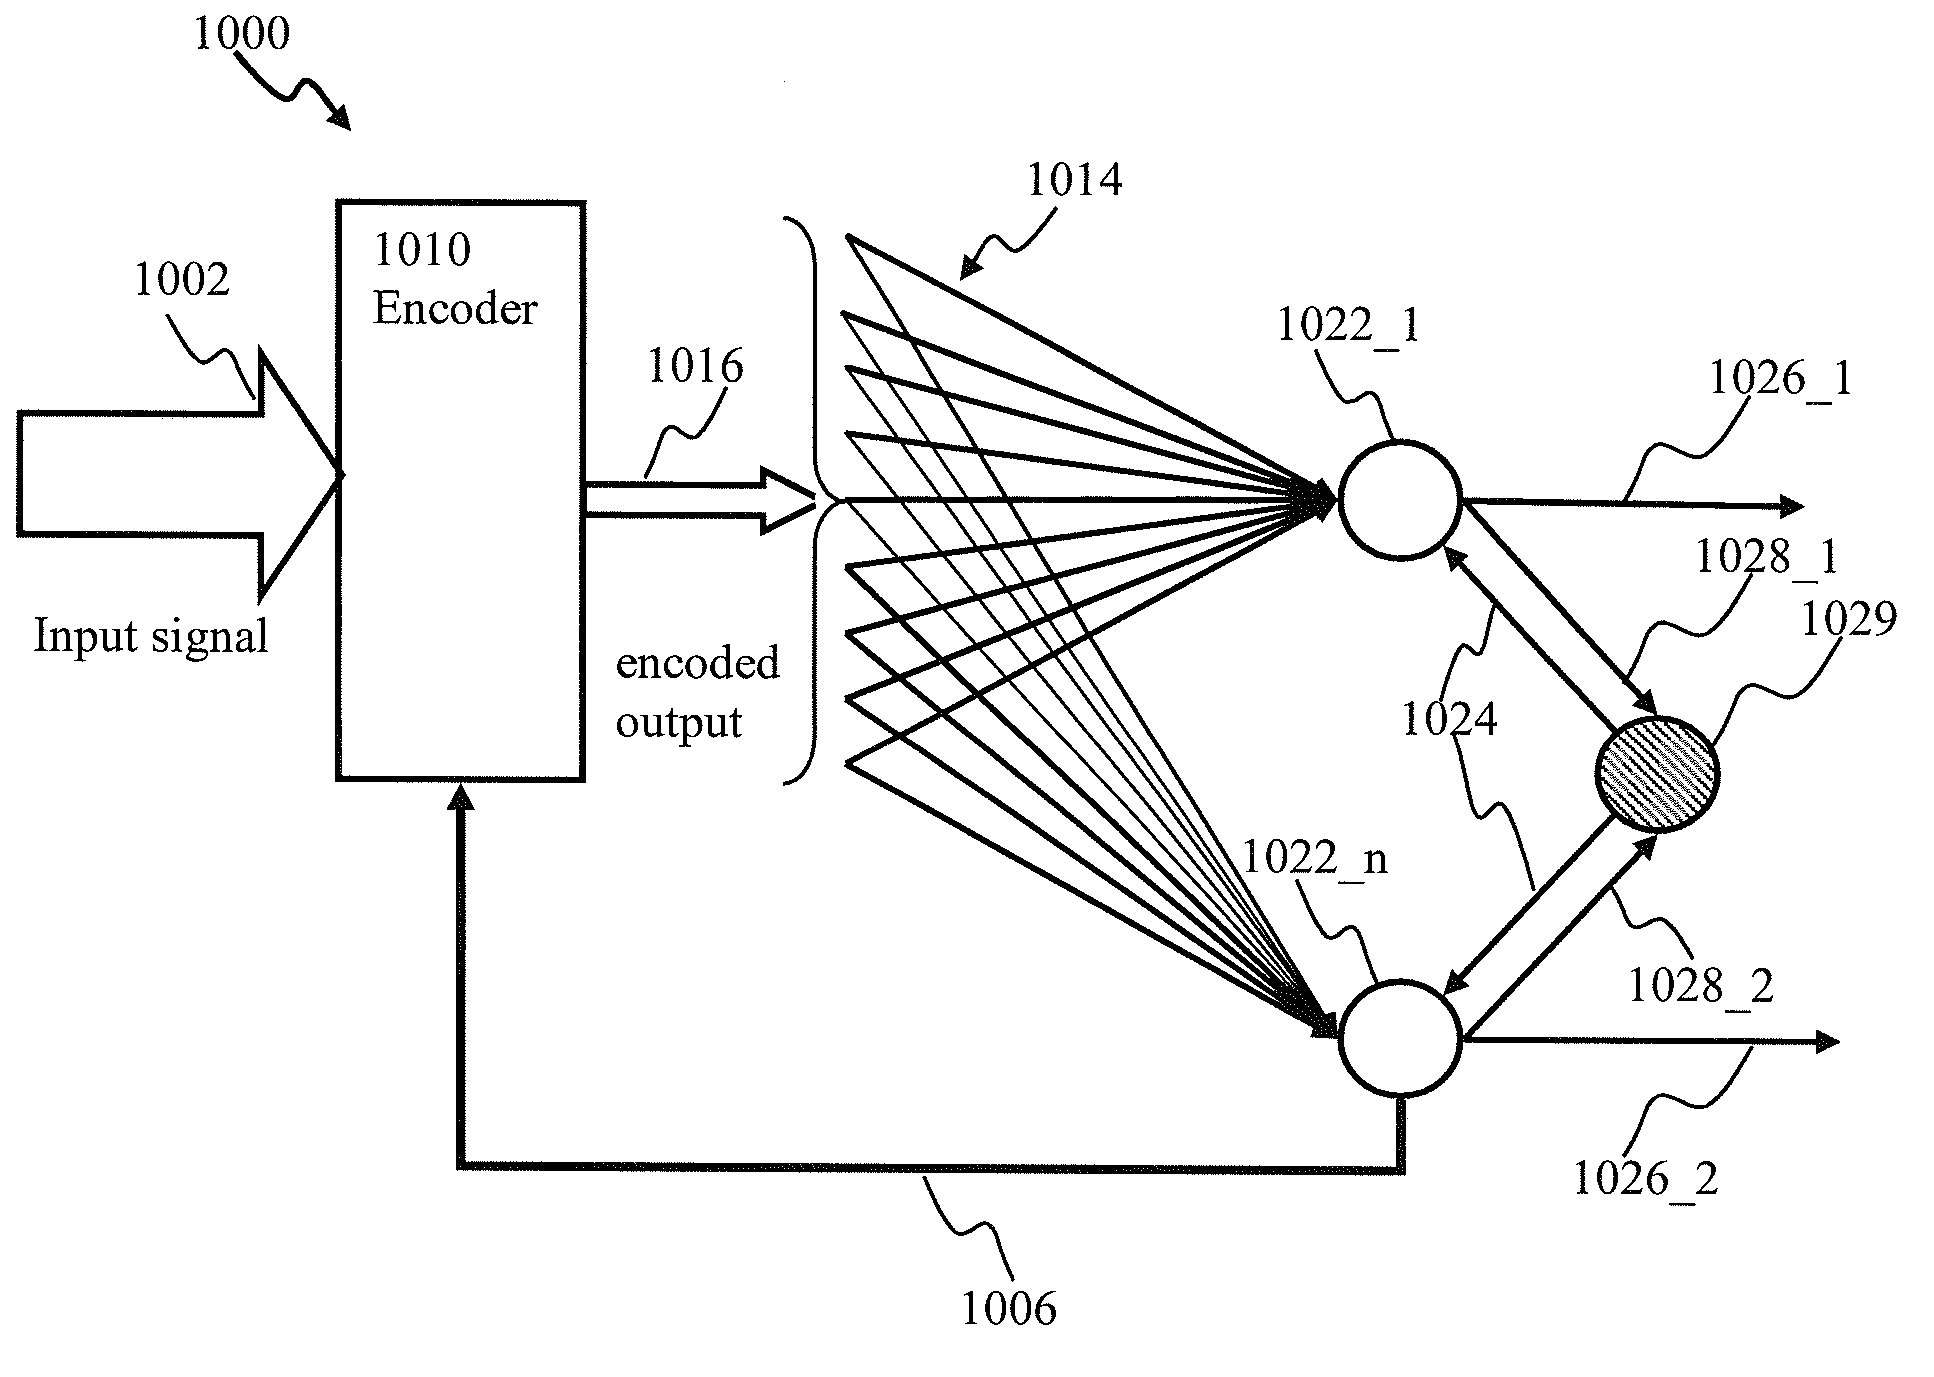 Spiking neuron network sensory processing apparatus and methods